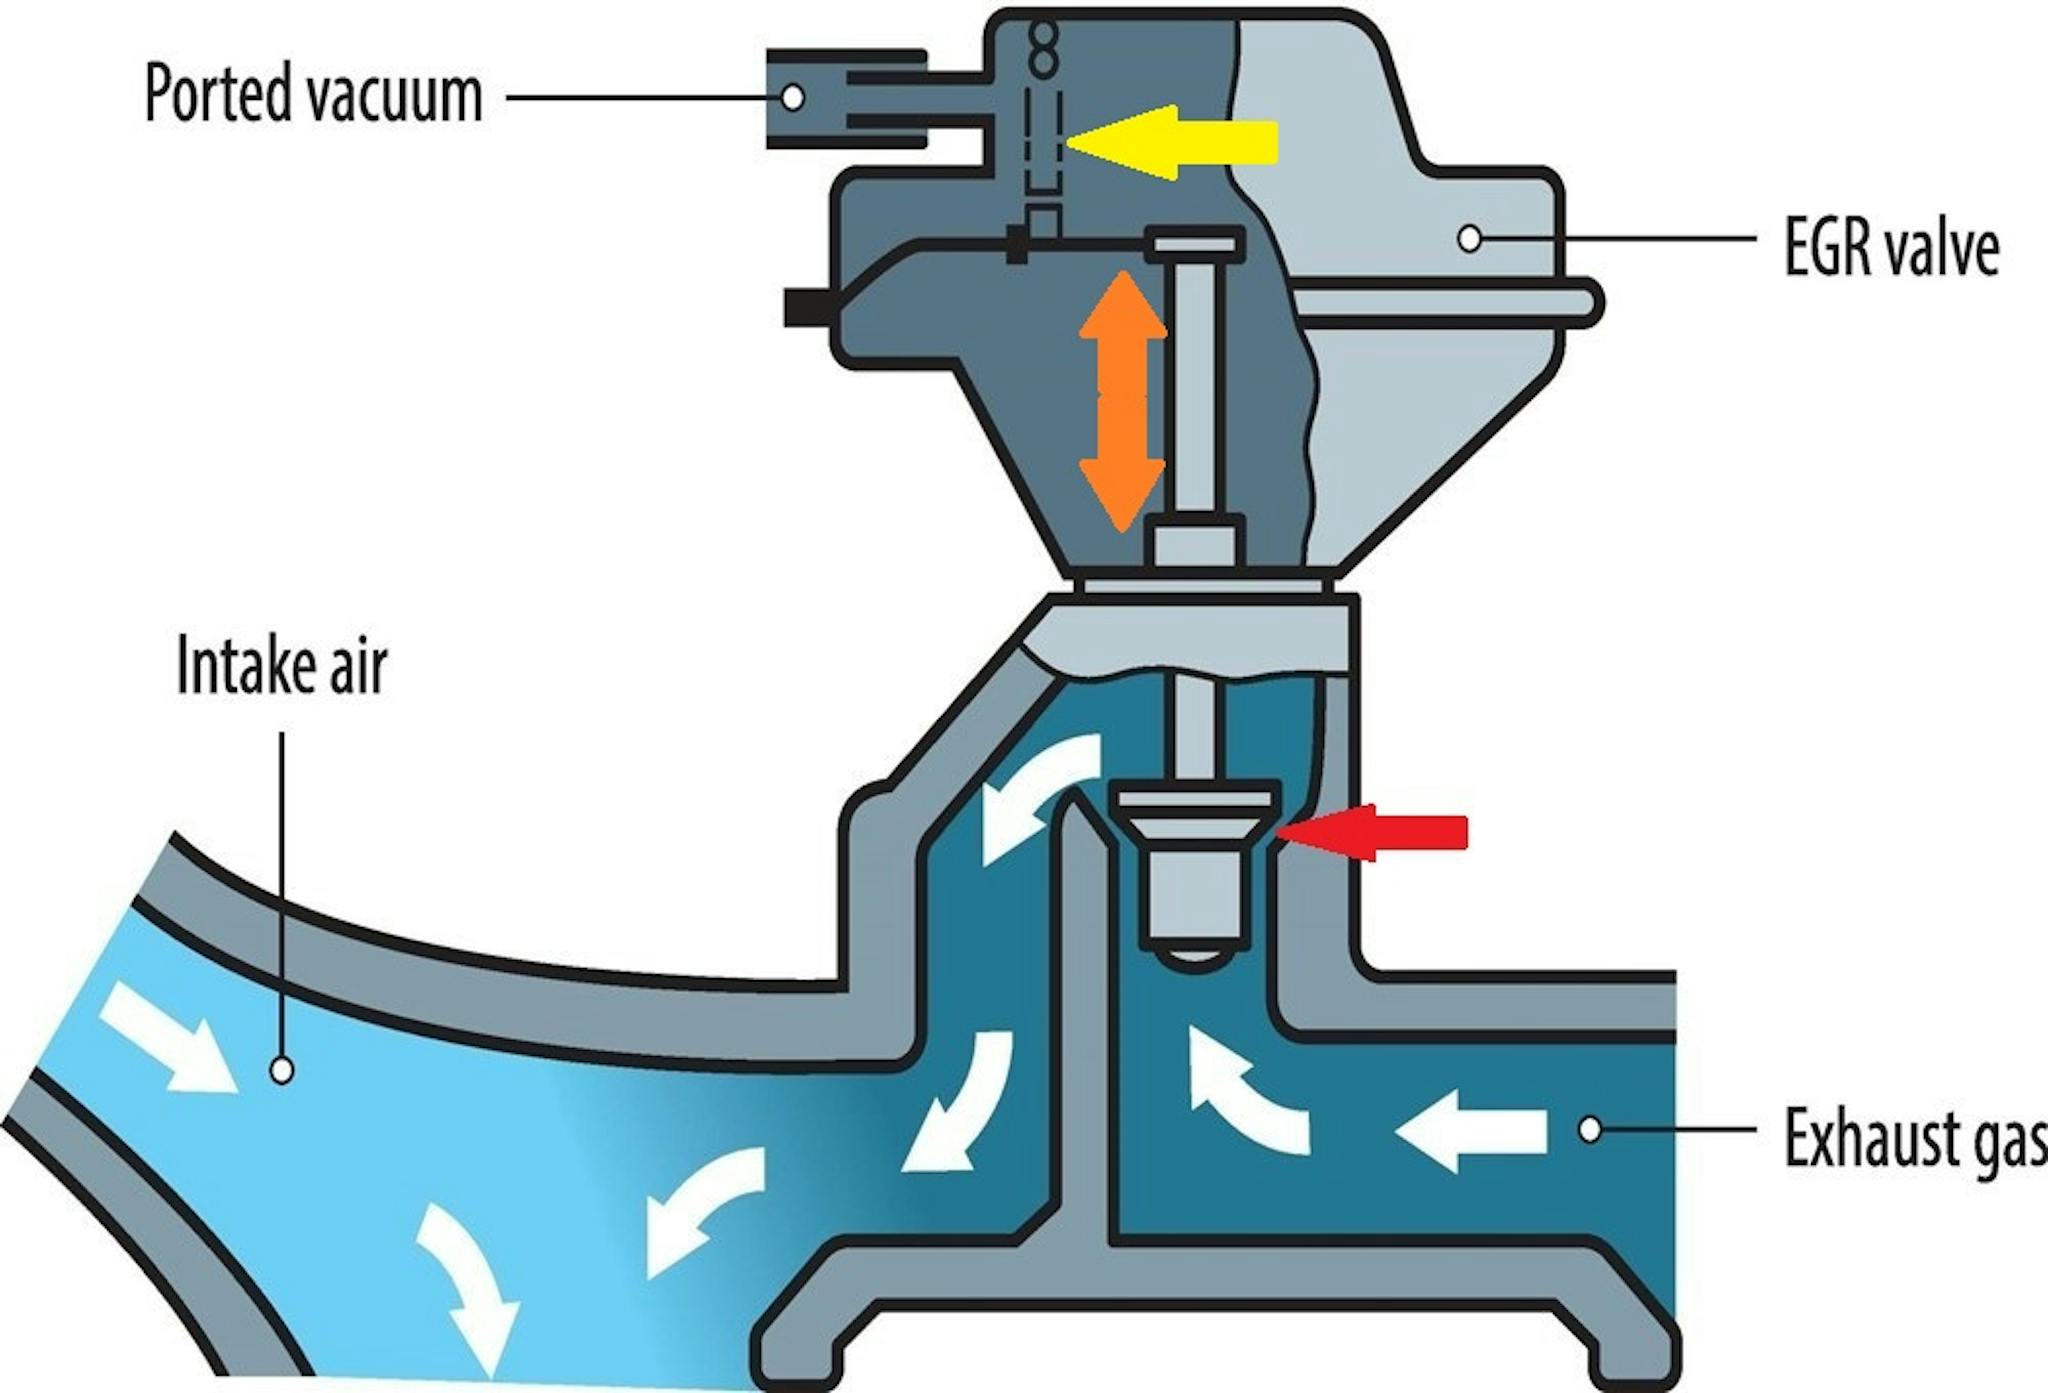 Image showing the basic operating principles of EGR valves.